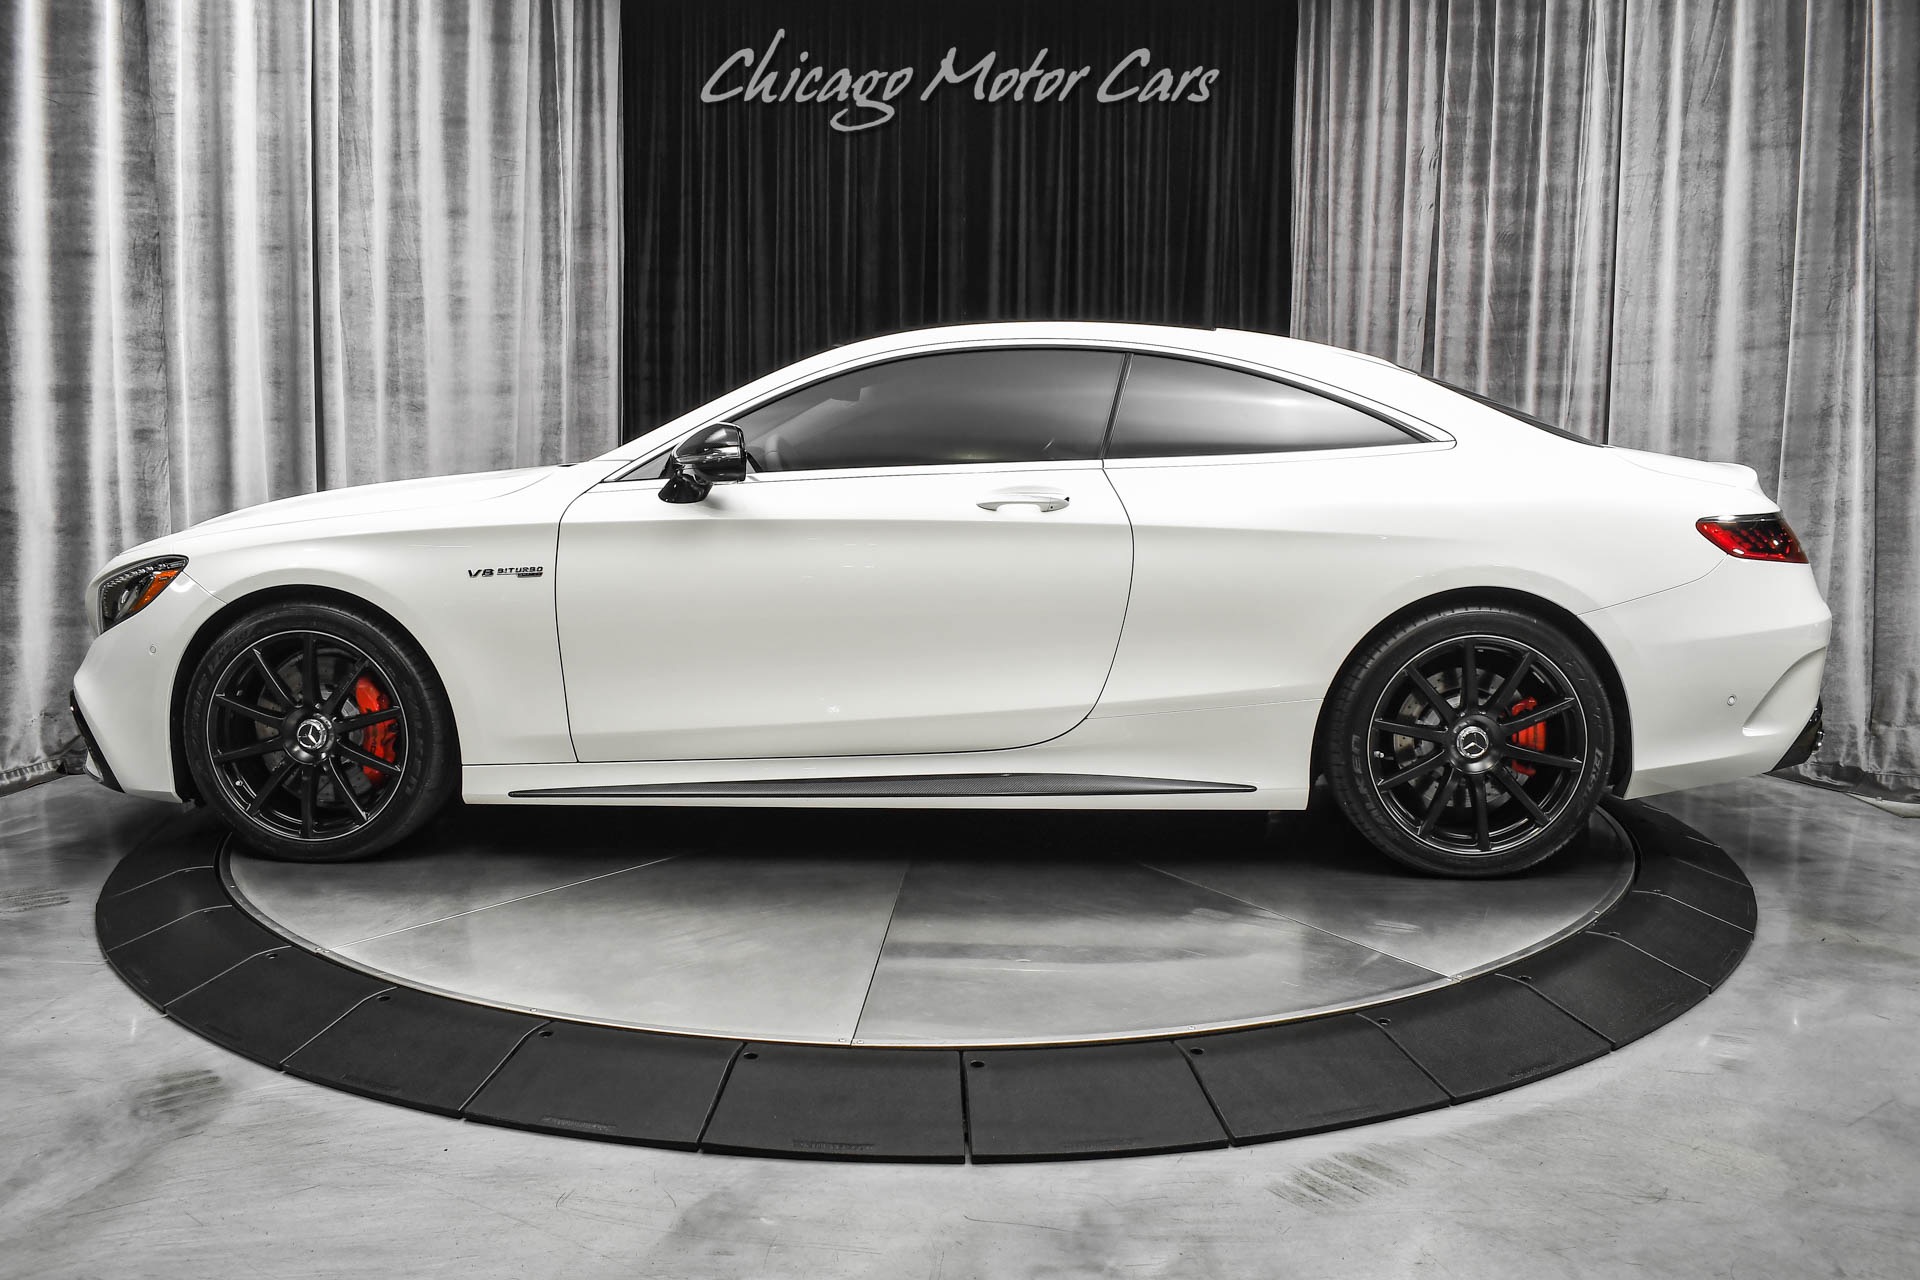 Used 2019 Mercedes-Benz S63 AMG 4Matic Coupe HUGE MSRP $196k 